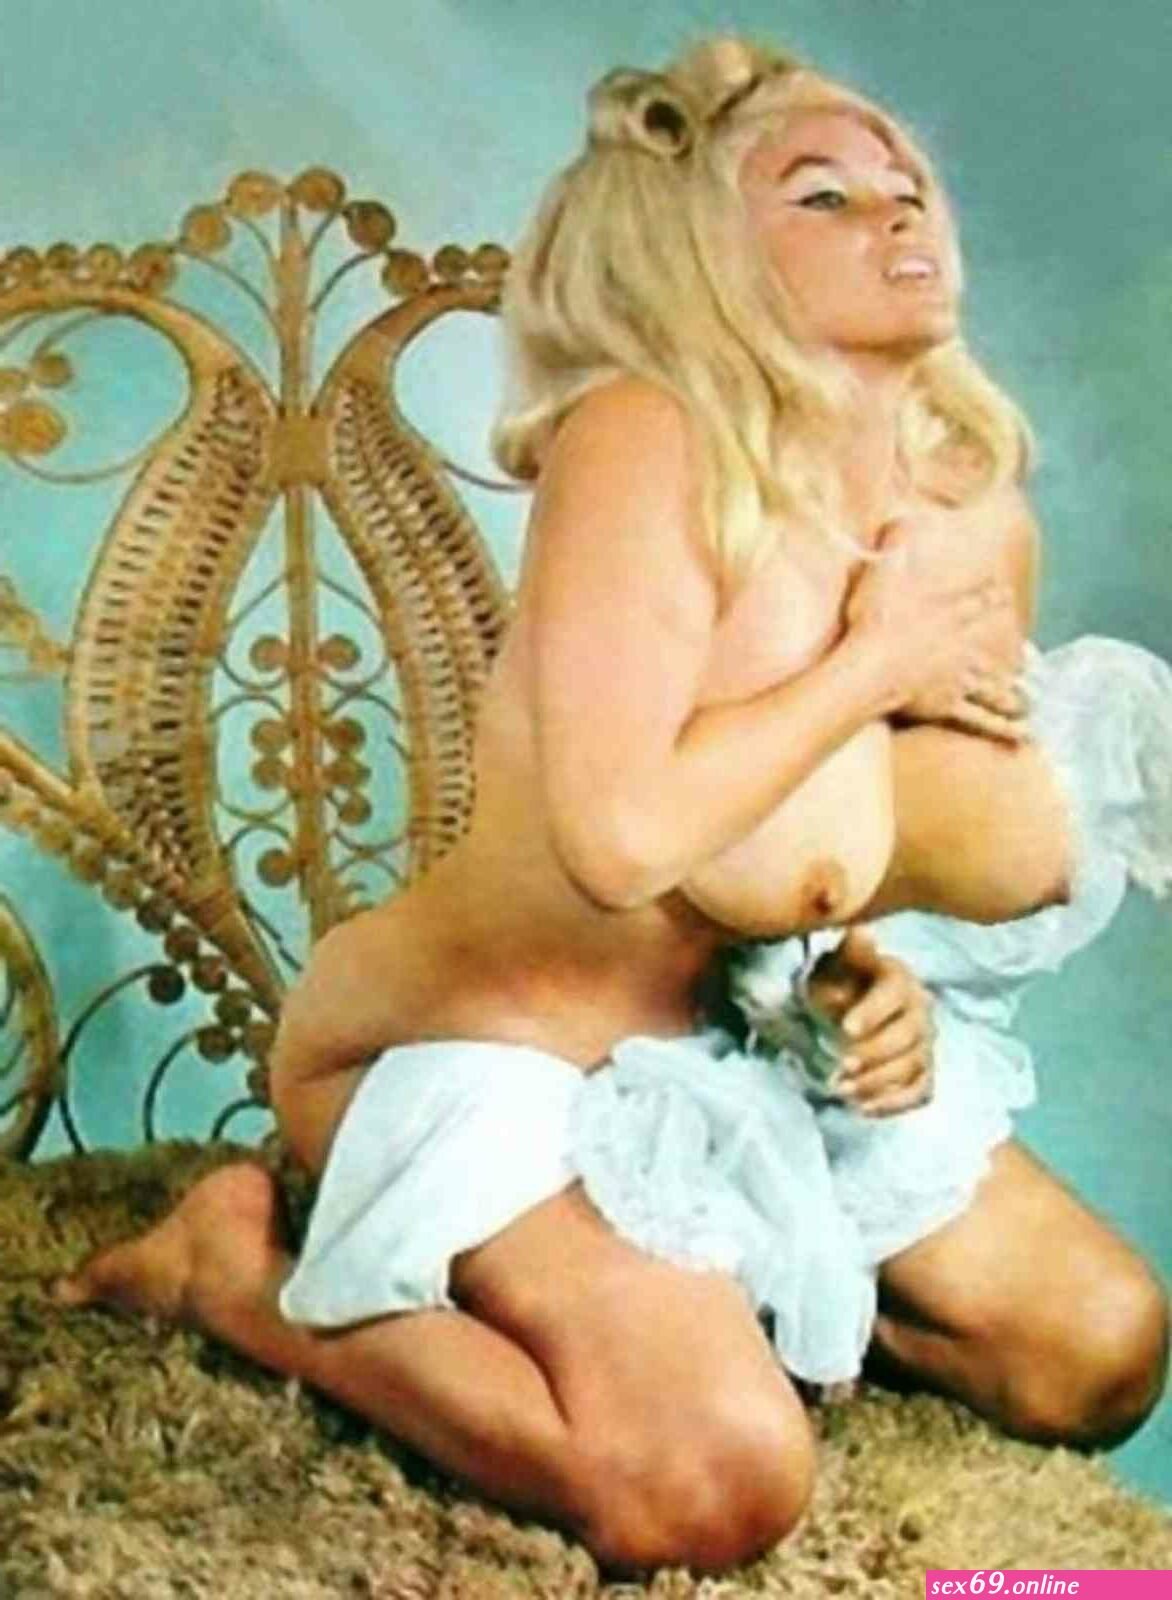 dante marinelli recommends jane mansfield nude pic